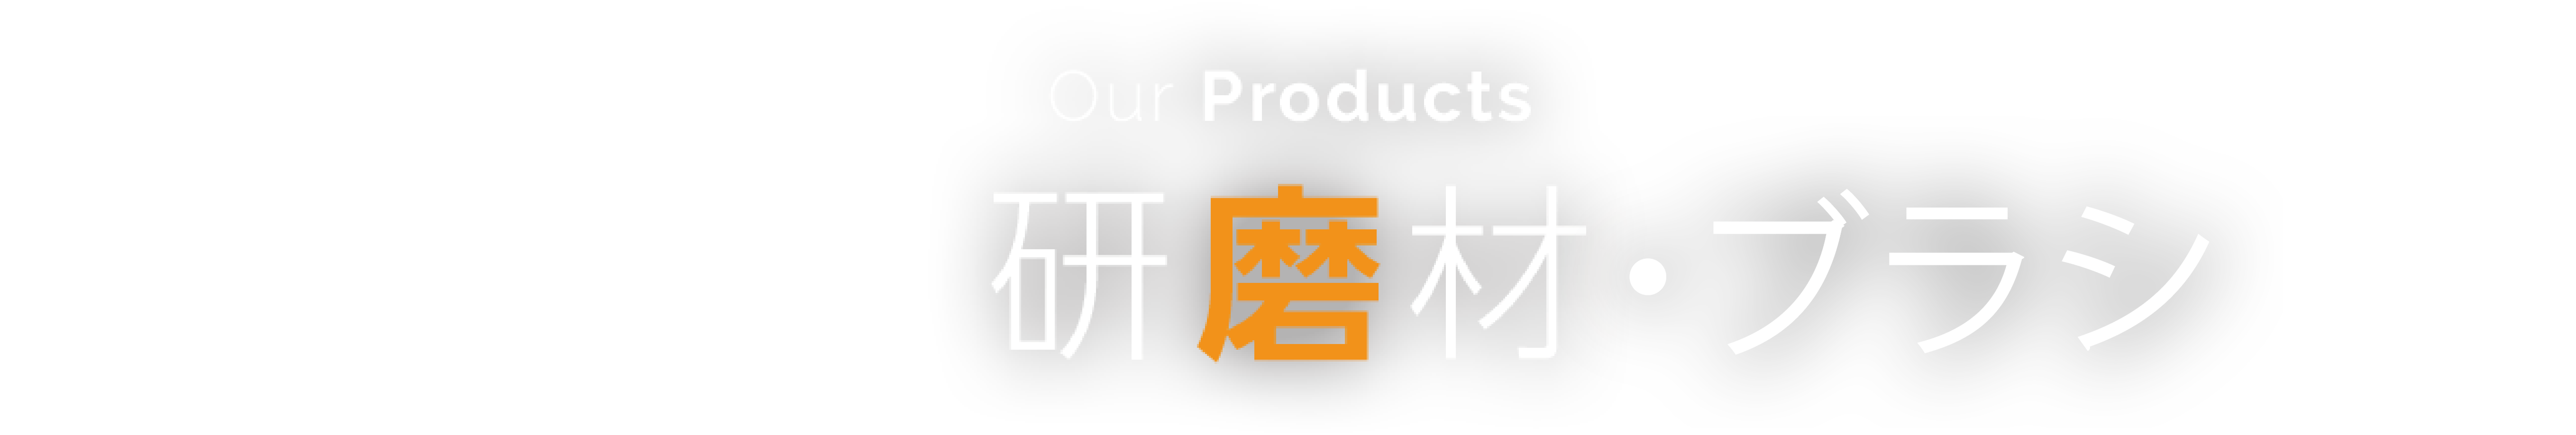 Our Products | 研磨材